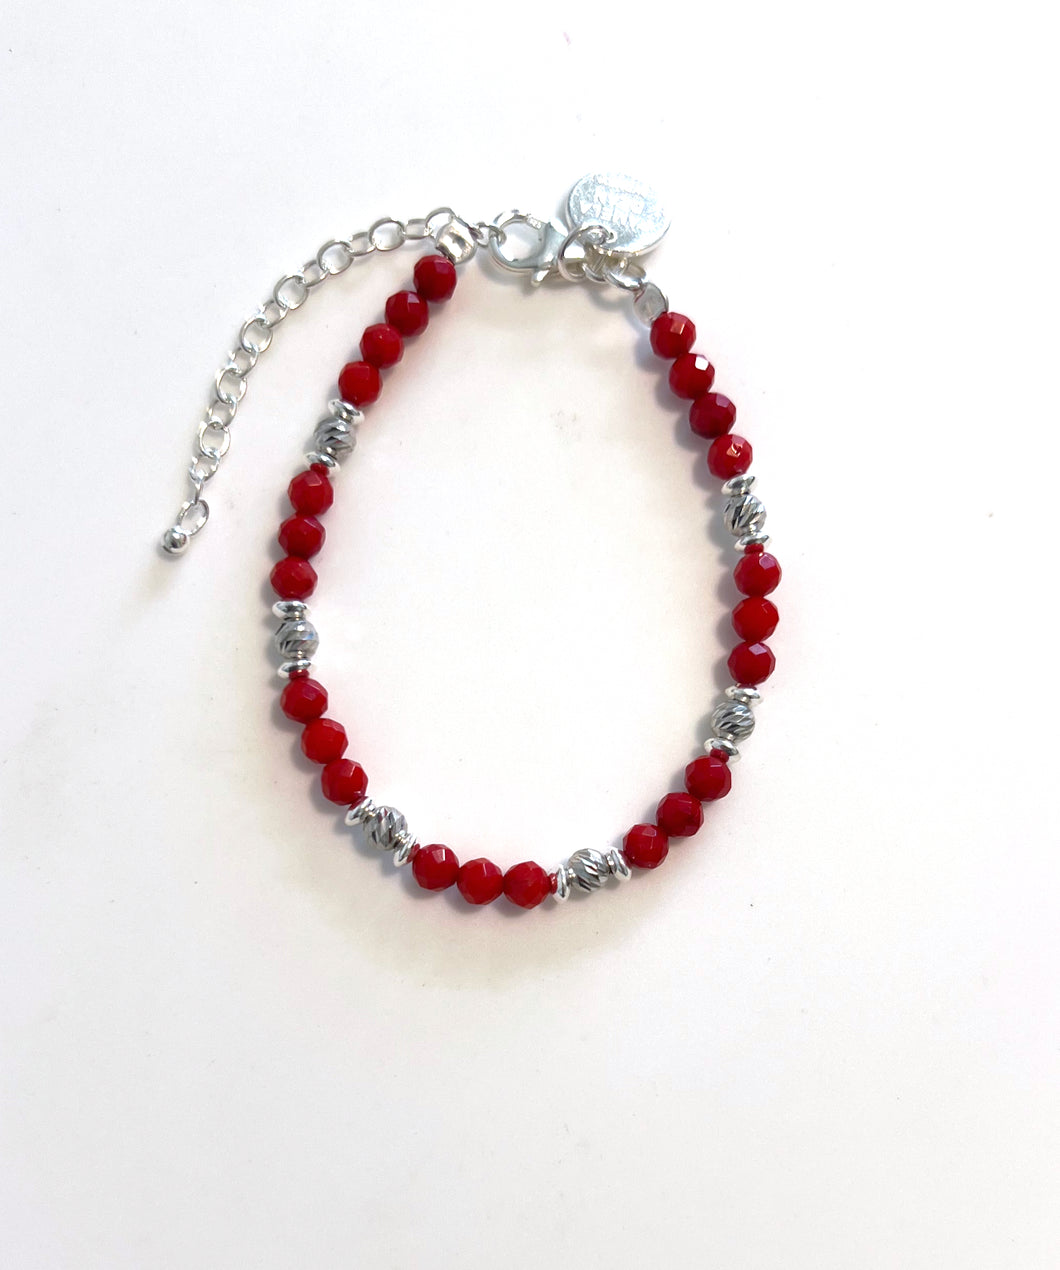 Red Coral Bracelet with Facetted Coral Beads and Sterling Silver